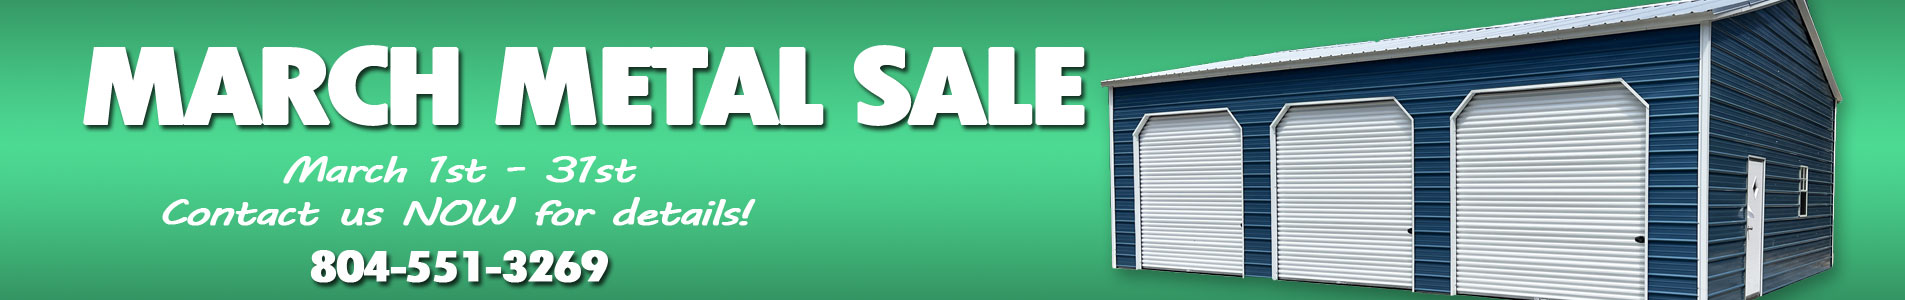 March Metal Building Sale - Up to 30% OFF